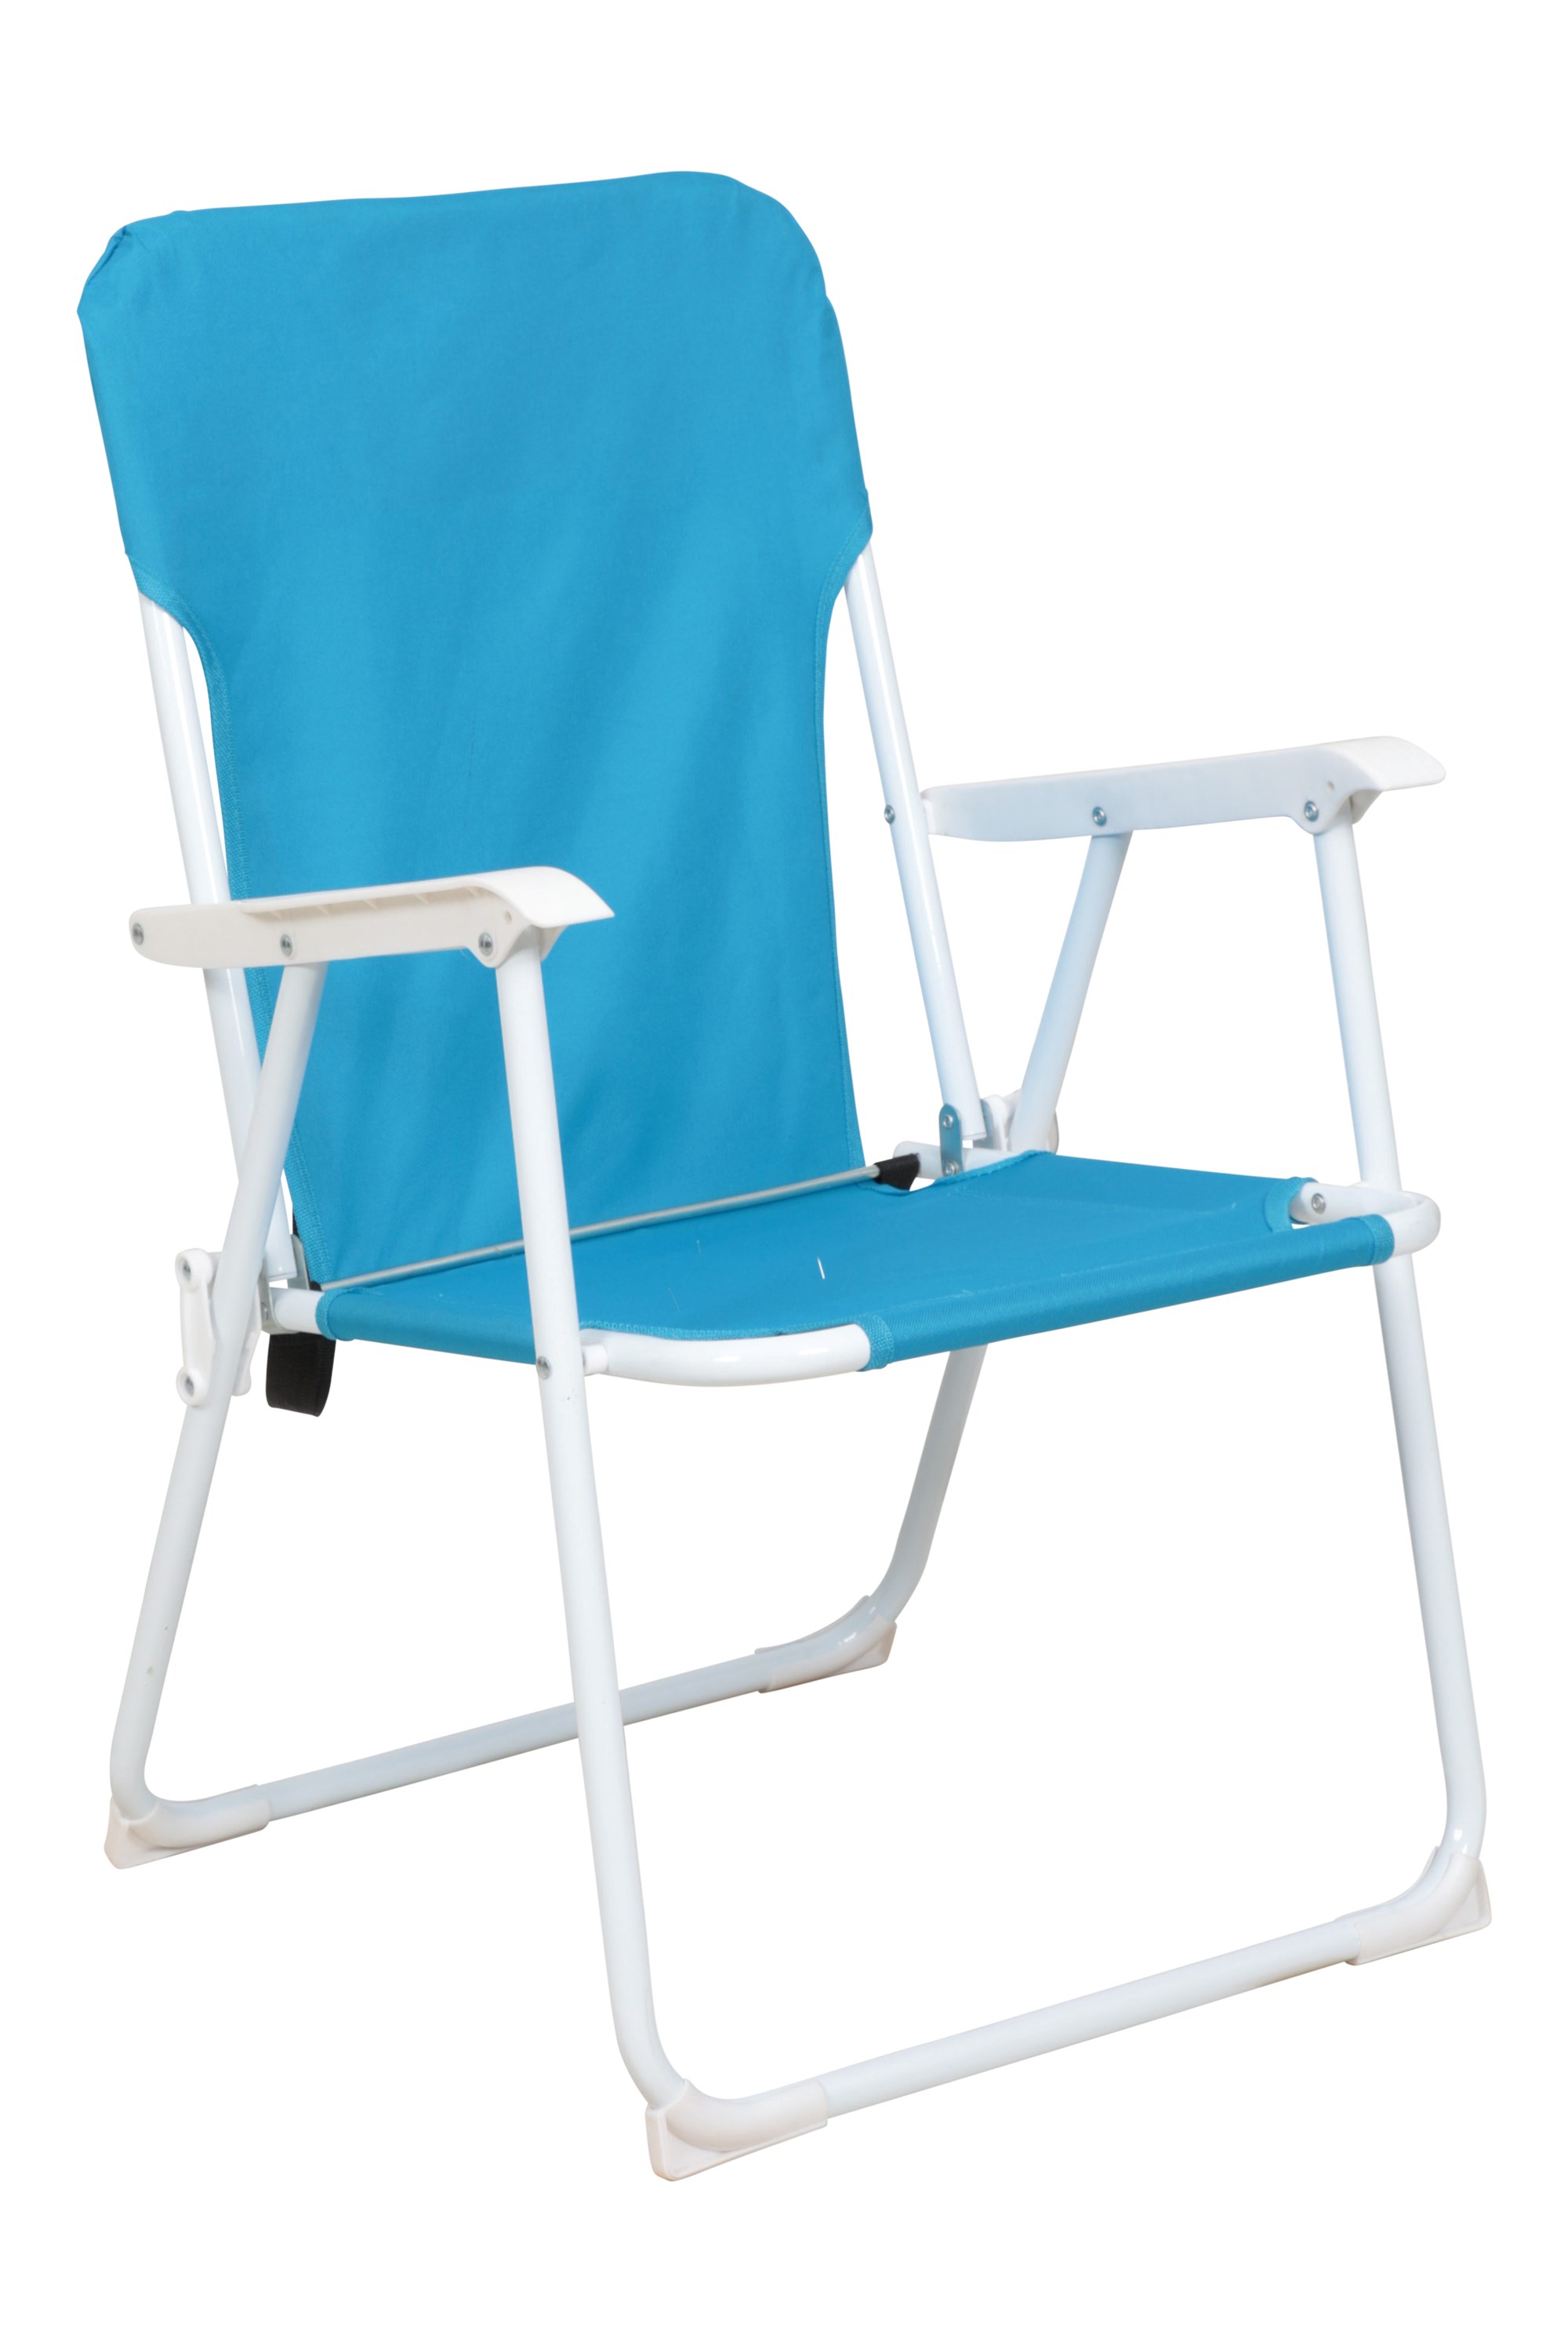 Lightweight Folding Chair With Backstraps - Turquoise